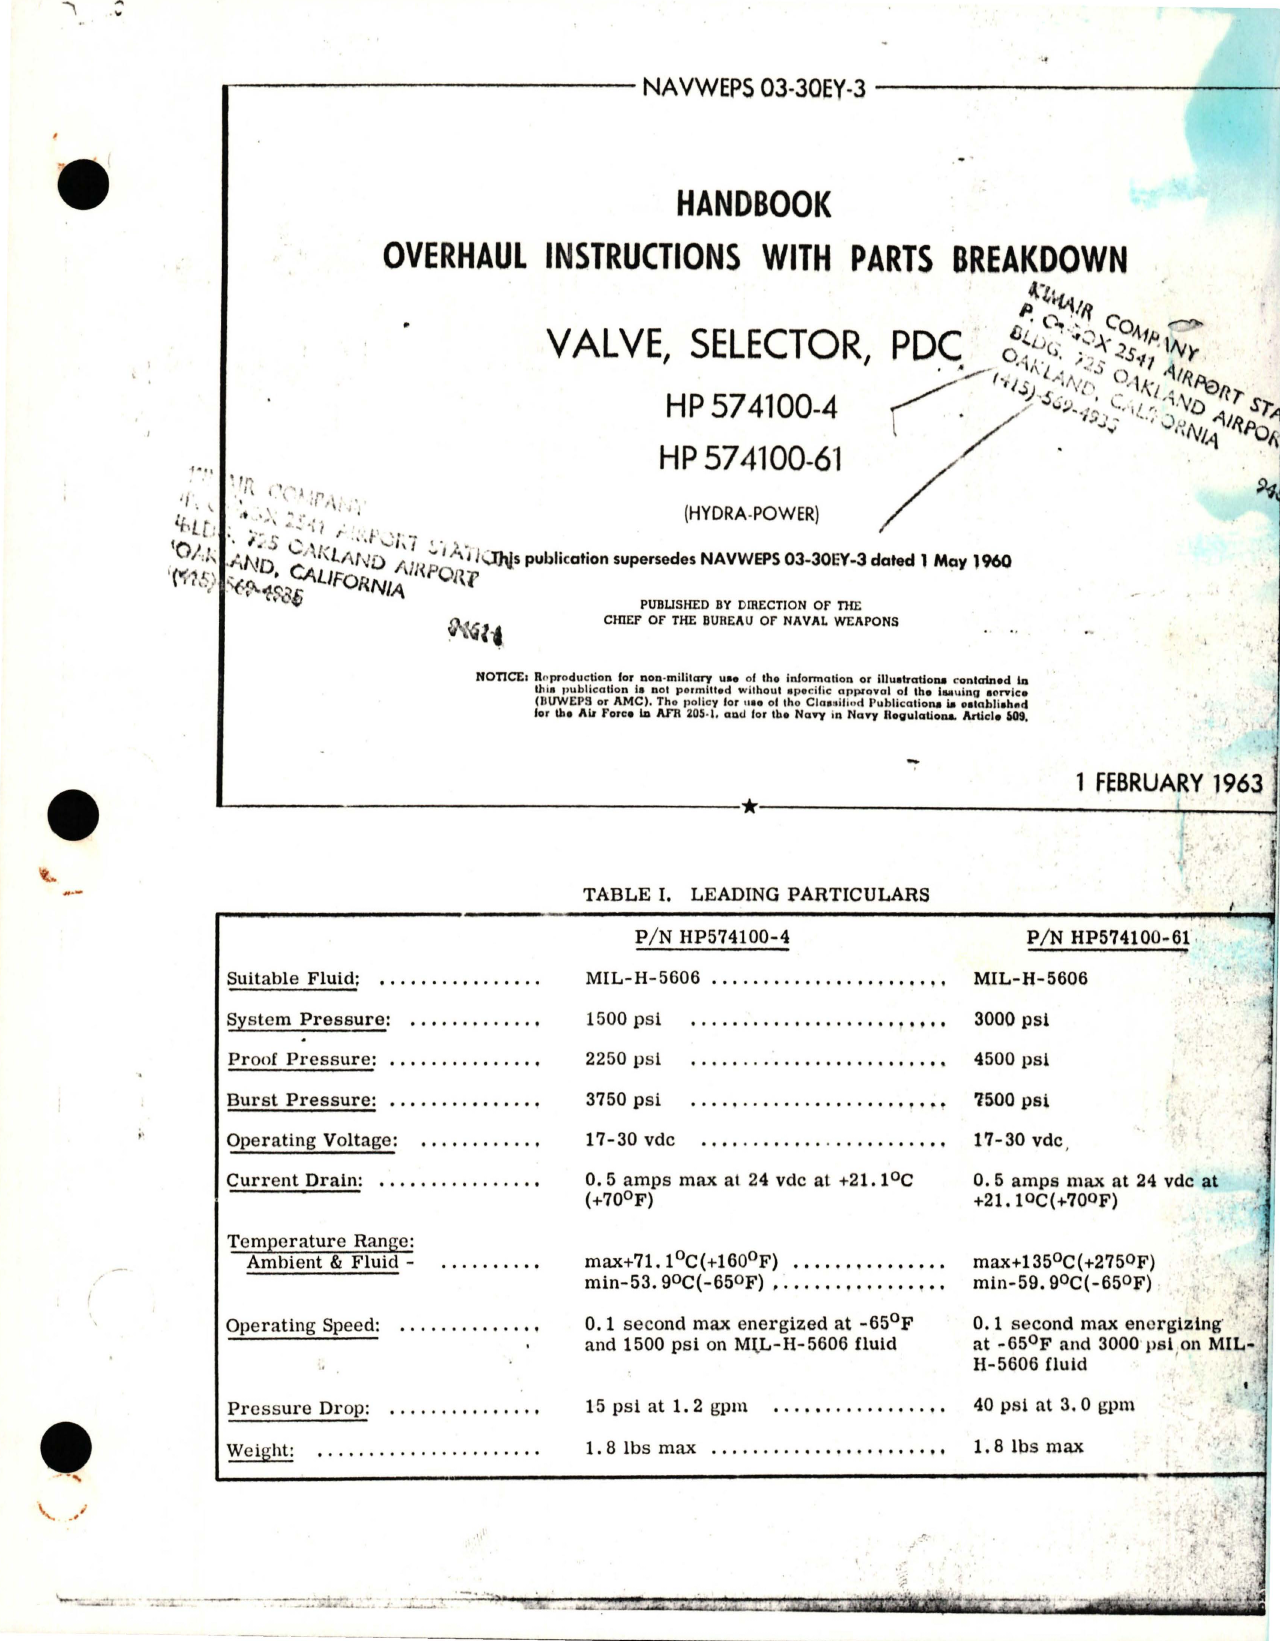 Sample page 1 from AirCorps Library document: Overhaul Instructions with Parts Breakdown for PDC Selector Valve - HP 574100-4 and HP 574100-61